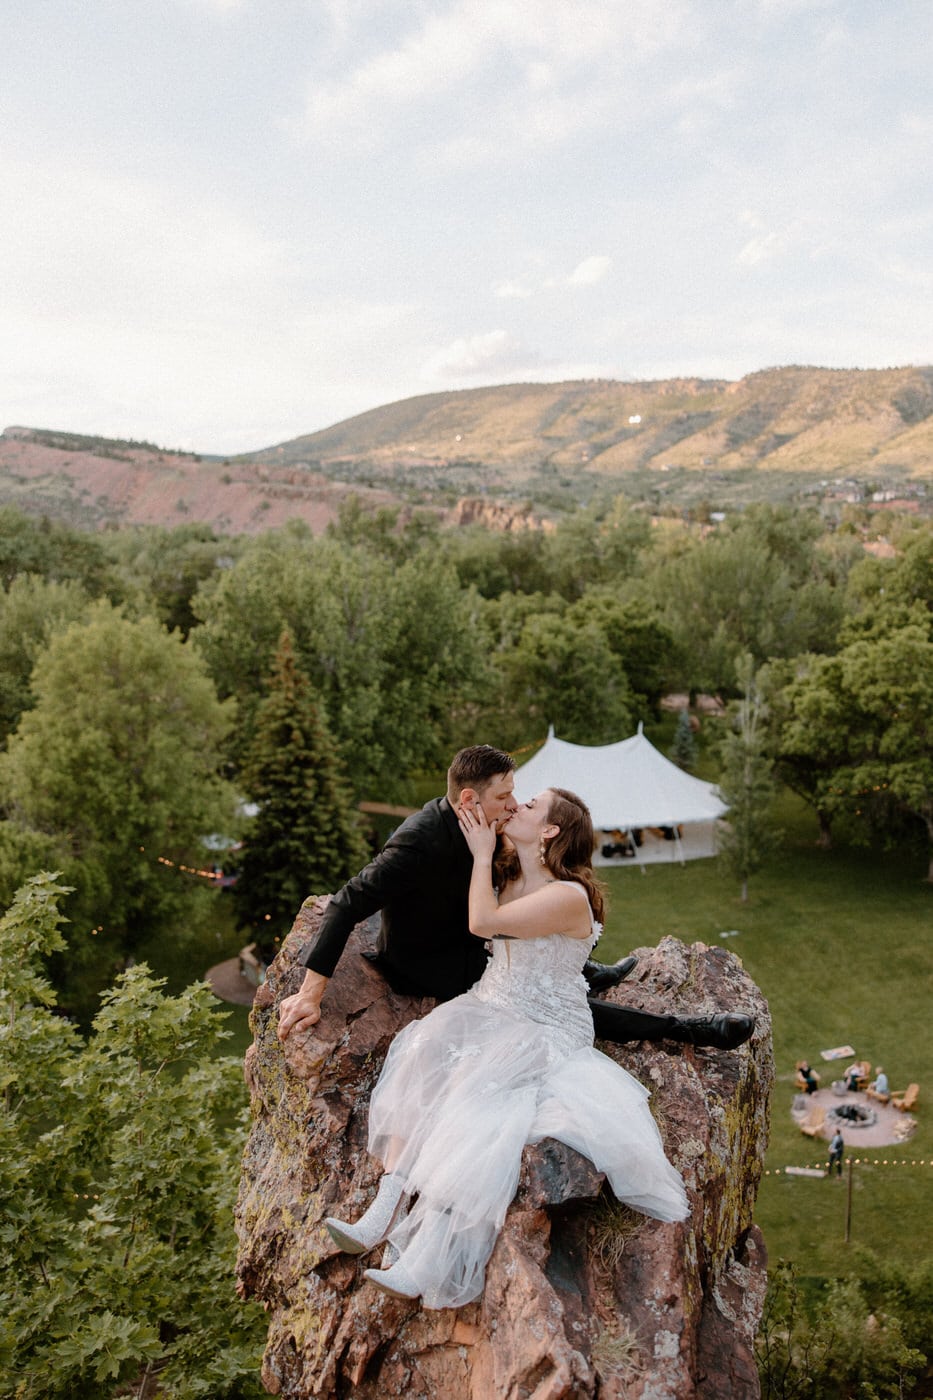 River Bend Wedding Venue in Colorad. This is one of the best Colorado wedding venues and the cliffside sunset photos with the bride and groom.